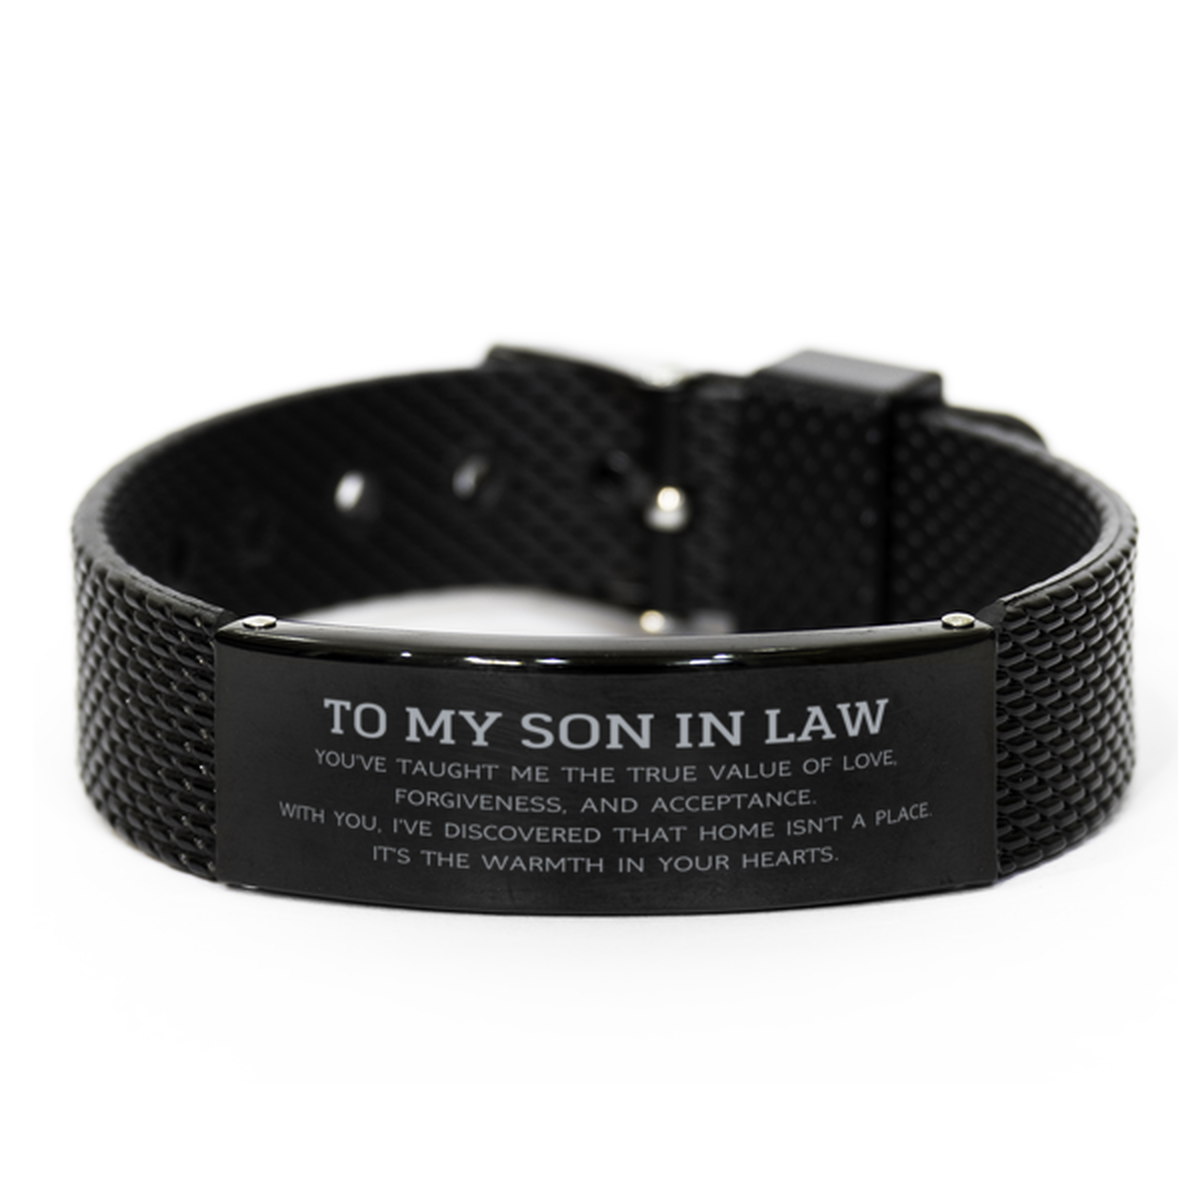 To My Son In Law Gifts, You've taught me the true value of love, Thank You Gifts For Son In Law, Birthday Black Shark Mesh Bracelet For Son In Law